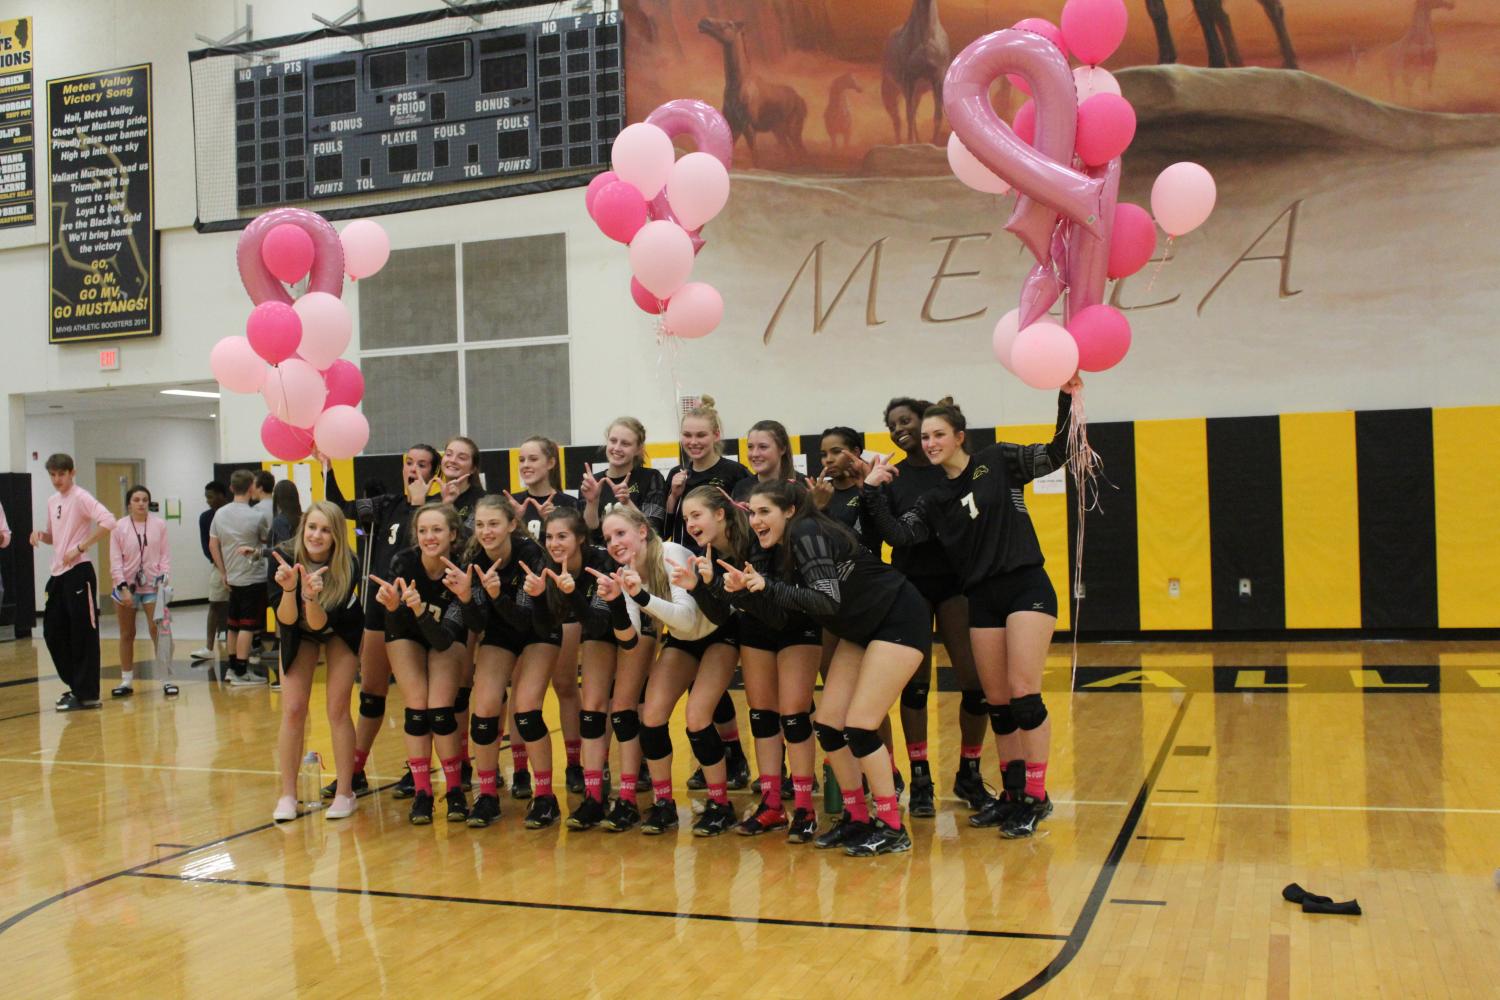 Girls+Volleyball+plays+in+honor+of+breast+cancer